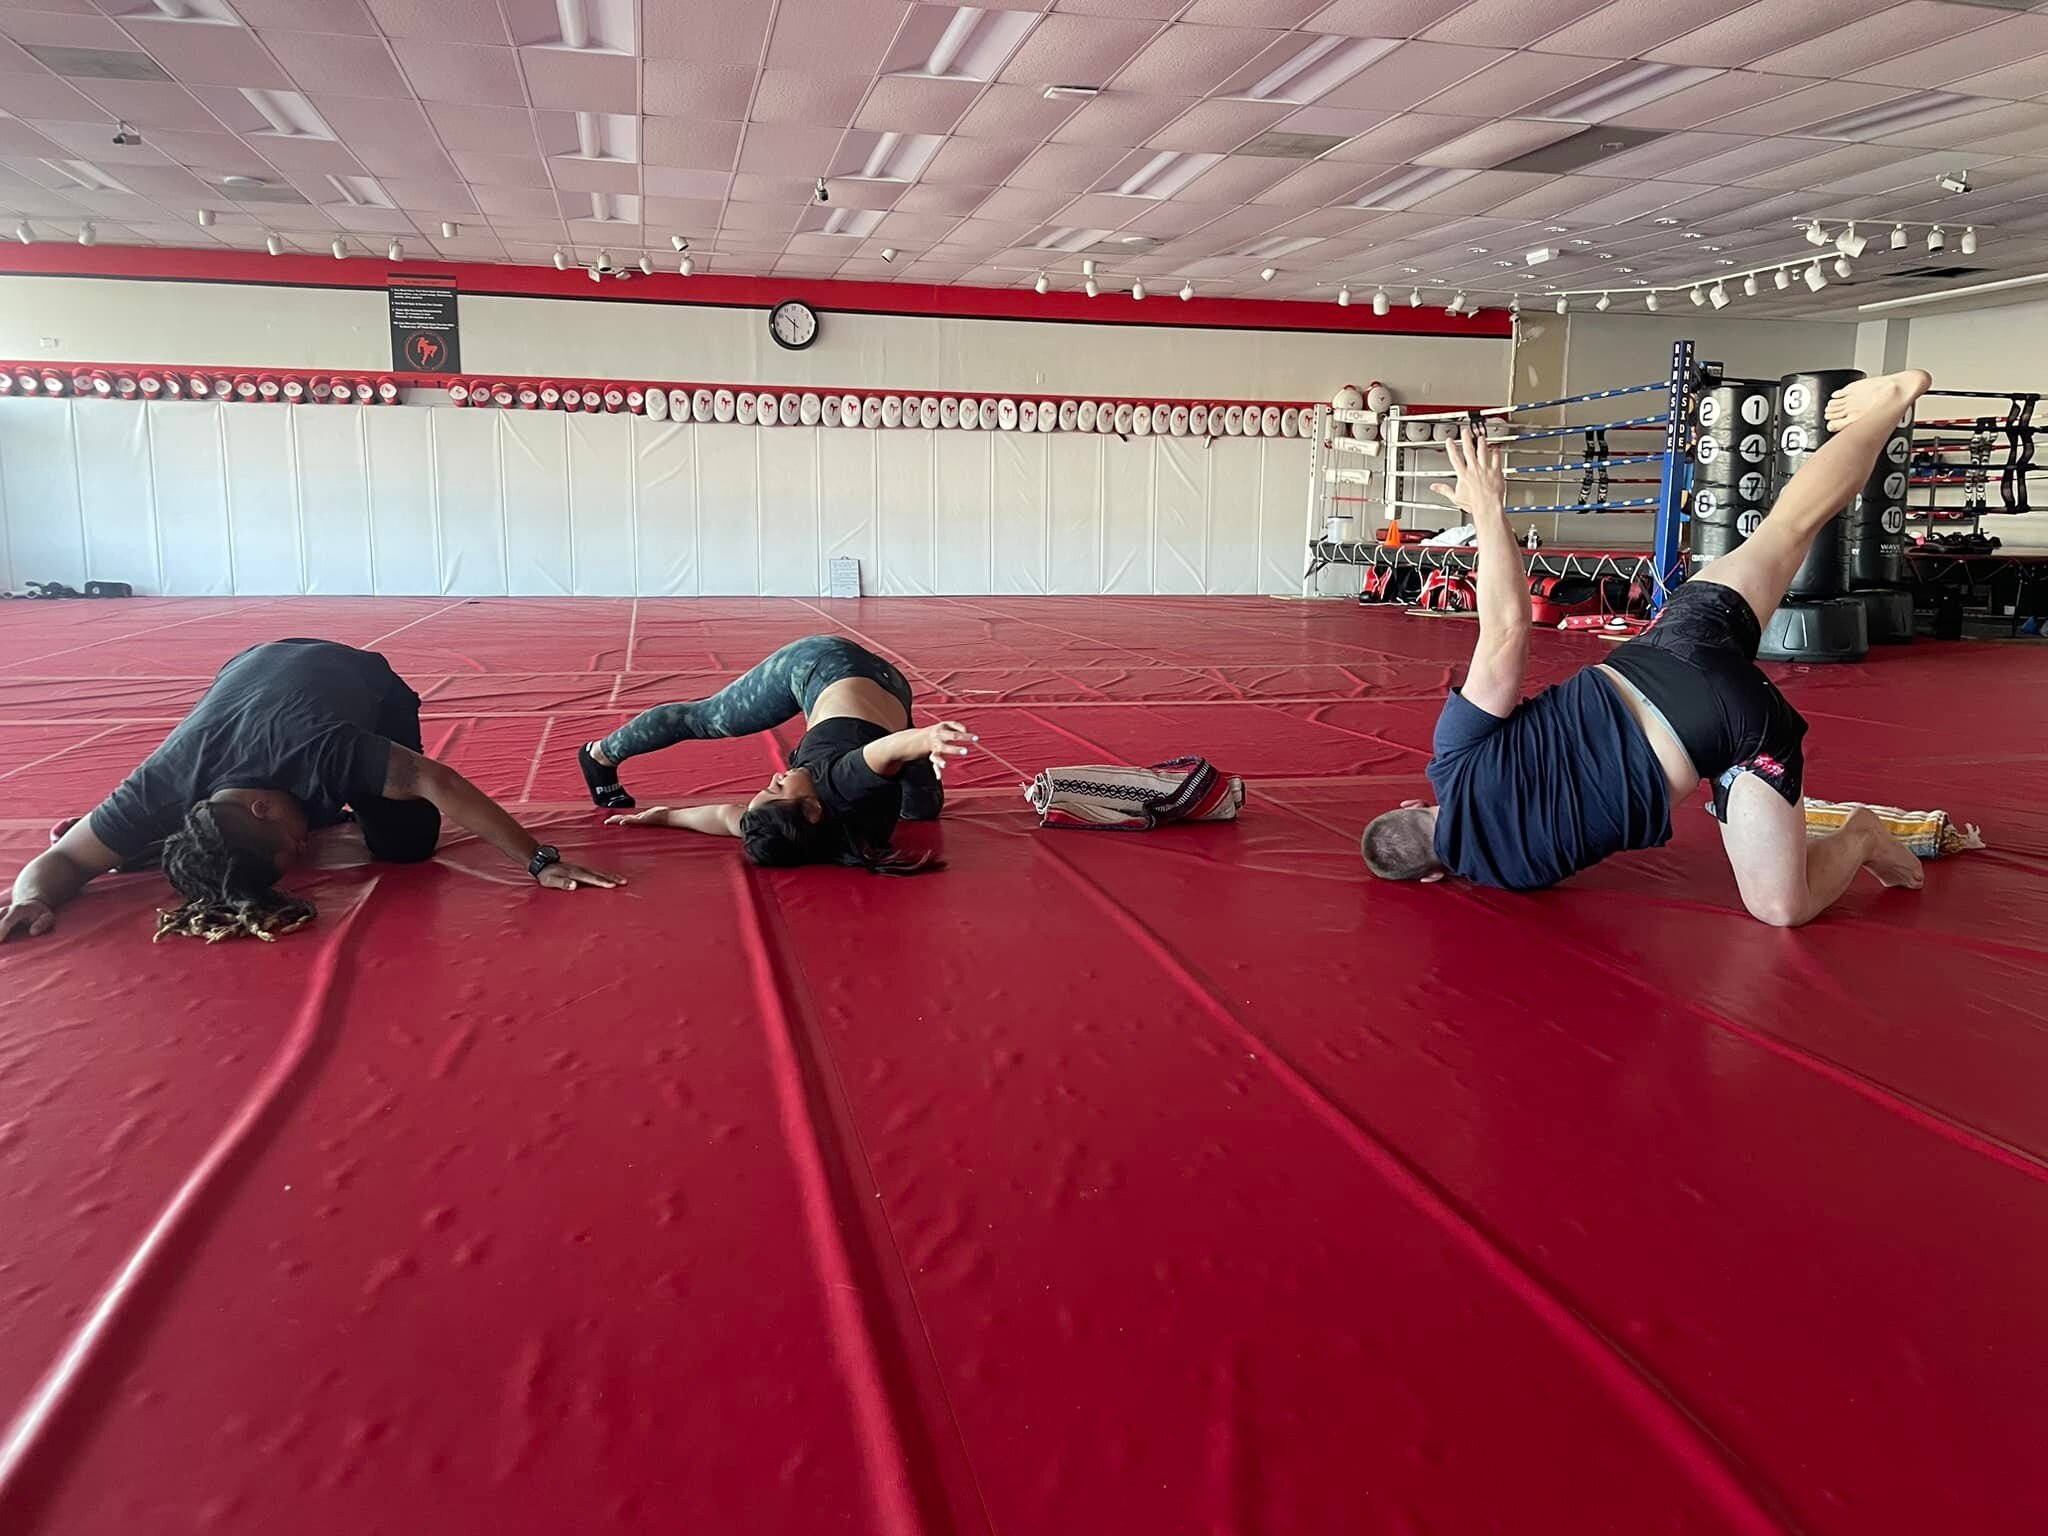 ✌🏾I love this crew at American Muay Thai and Monroe Hall BJJ.

❤️This is where all of us get to relax, recover, and reset for another week of training. 

💪🏻Every week is a new adventure and we always learn somethjng to improve our overall strengrh